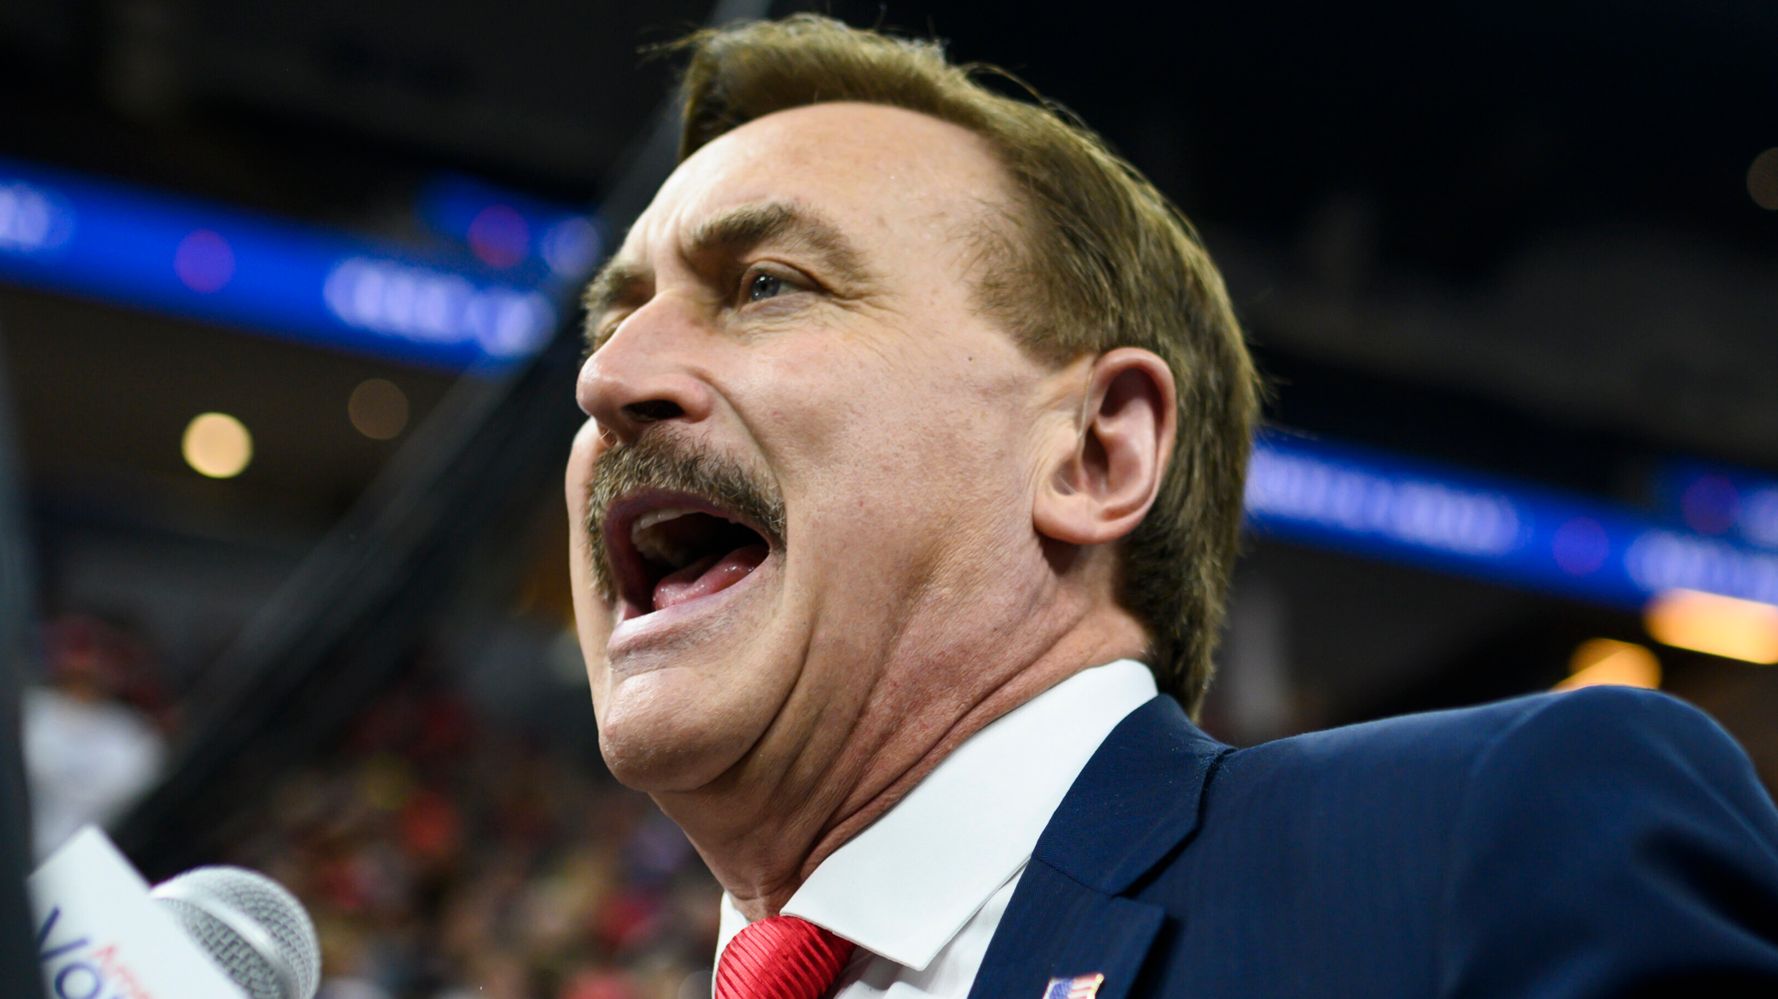 MyPillow Guy Mike Lindell Reportedly Kicked Out Of Republican Governors Event